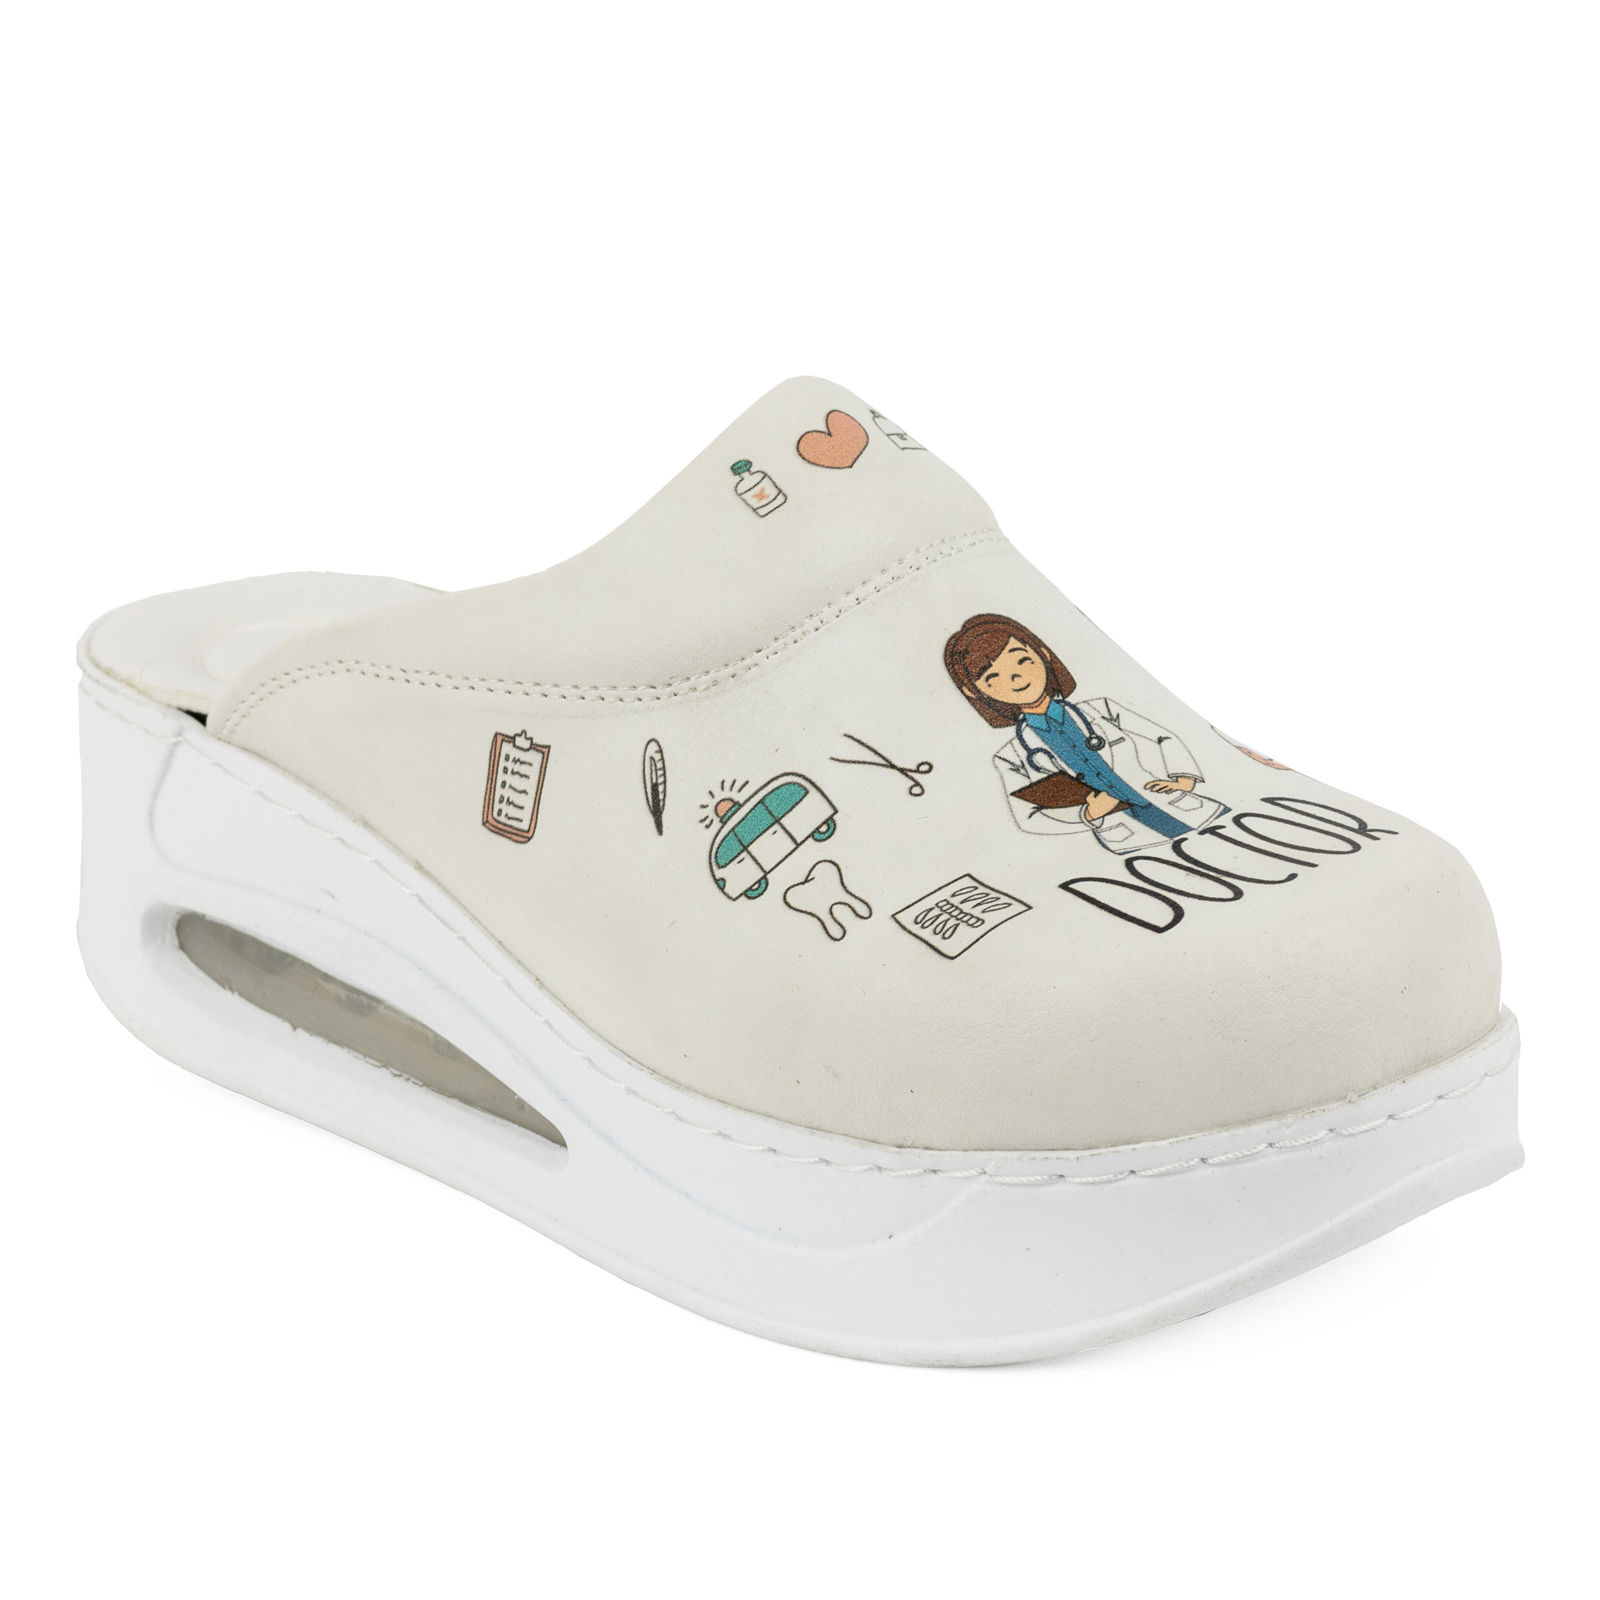 Patterned women clogs A099 - DOCTOR AIR - WHITE